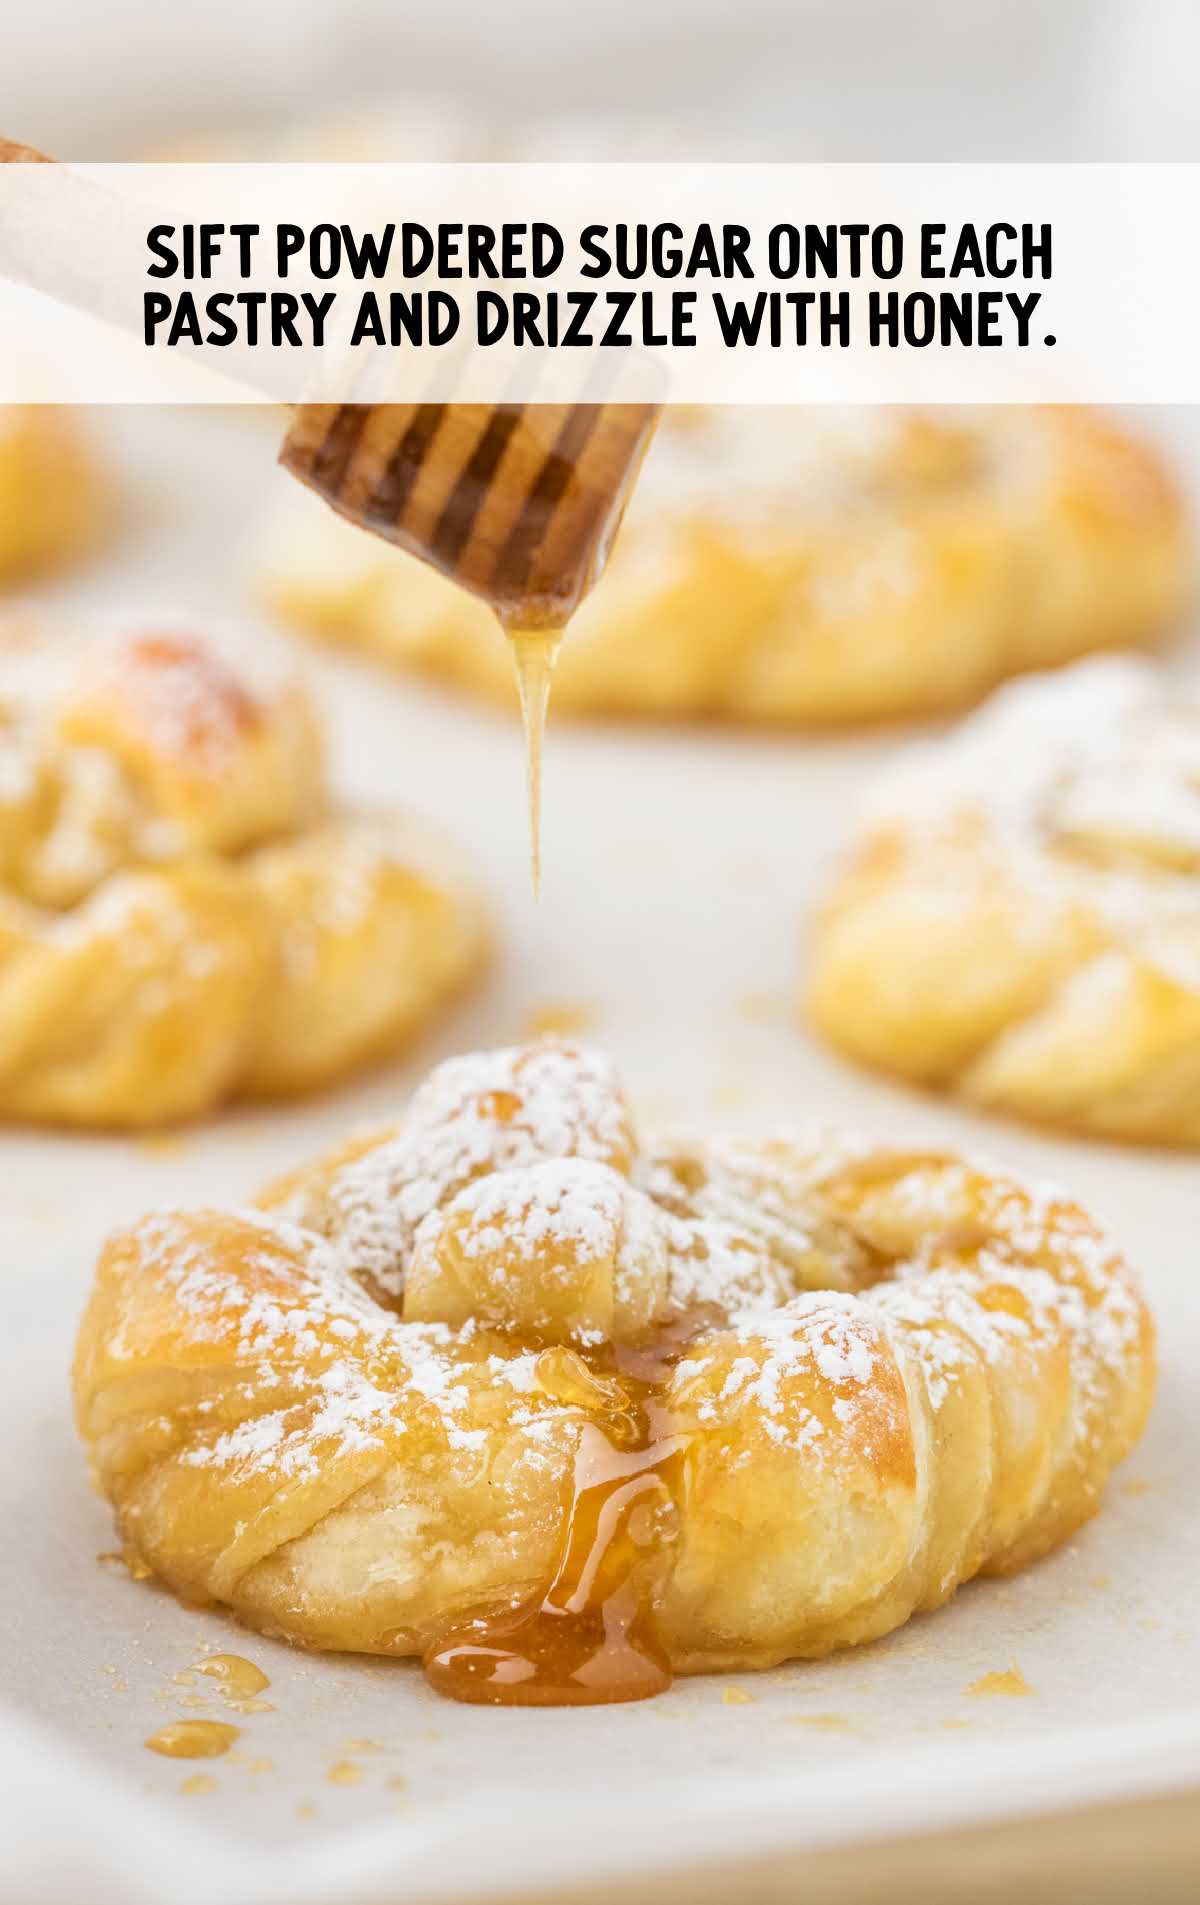 powdered sugar poured onto each pastry and drizzle with honey